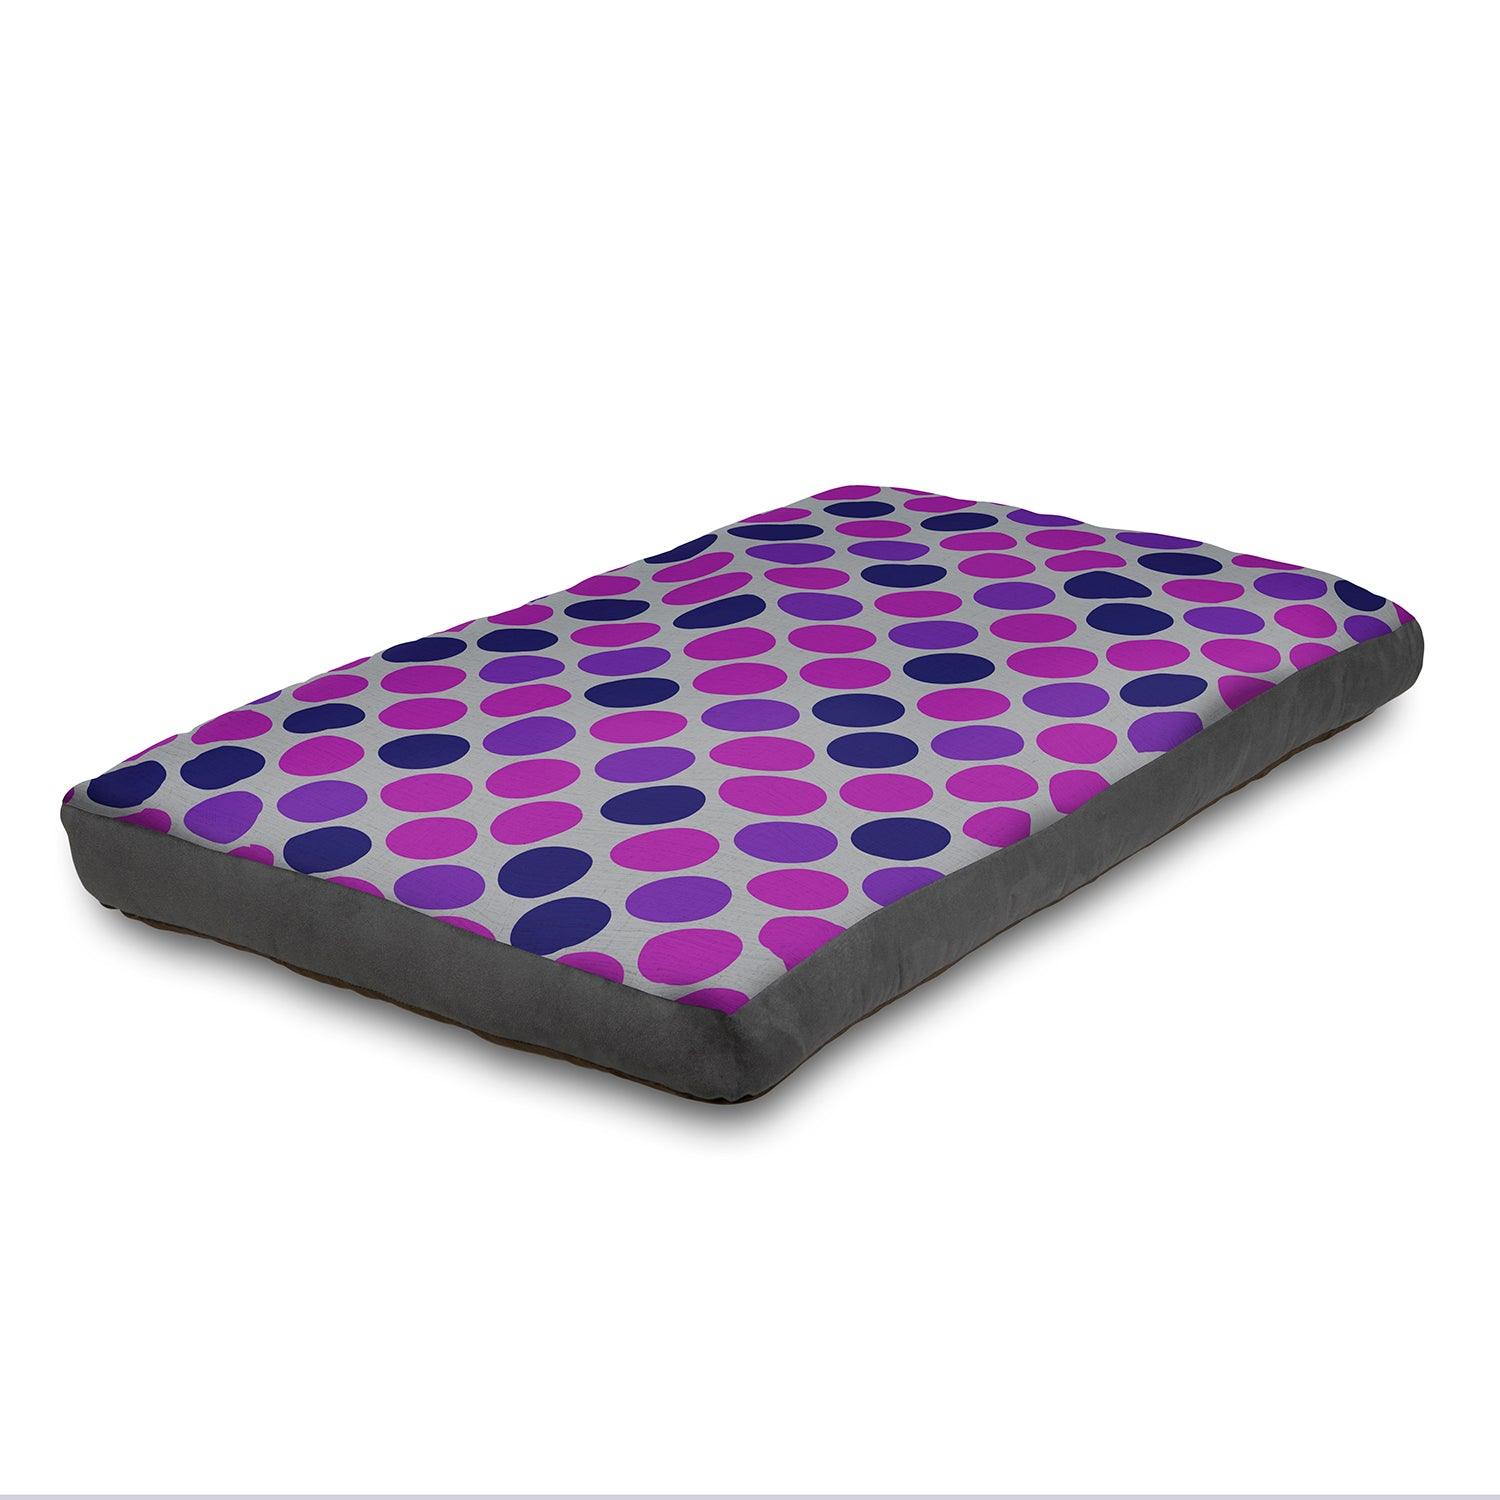 View Super Comfy Dog Bed Soft and Fluffy with Washable Cover Medium 100 cm x 65 cm Circles information